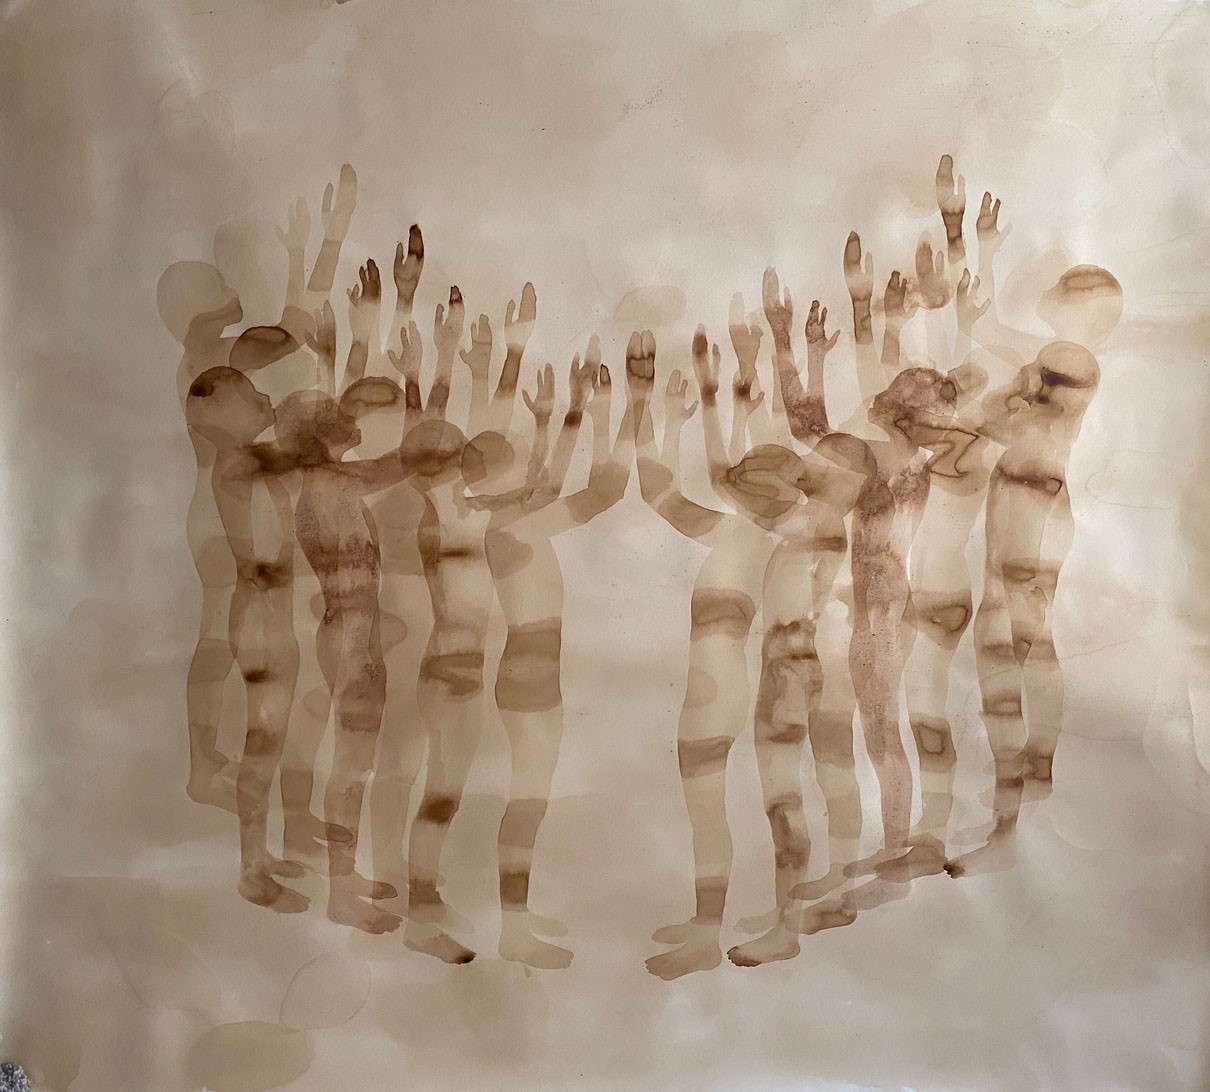 Marked Sinners <br>Medium: Tea on paper   <br> Size: 6.7ft by 5.8ft